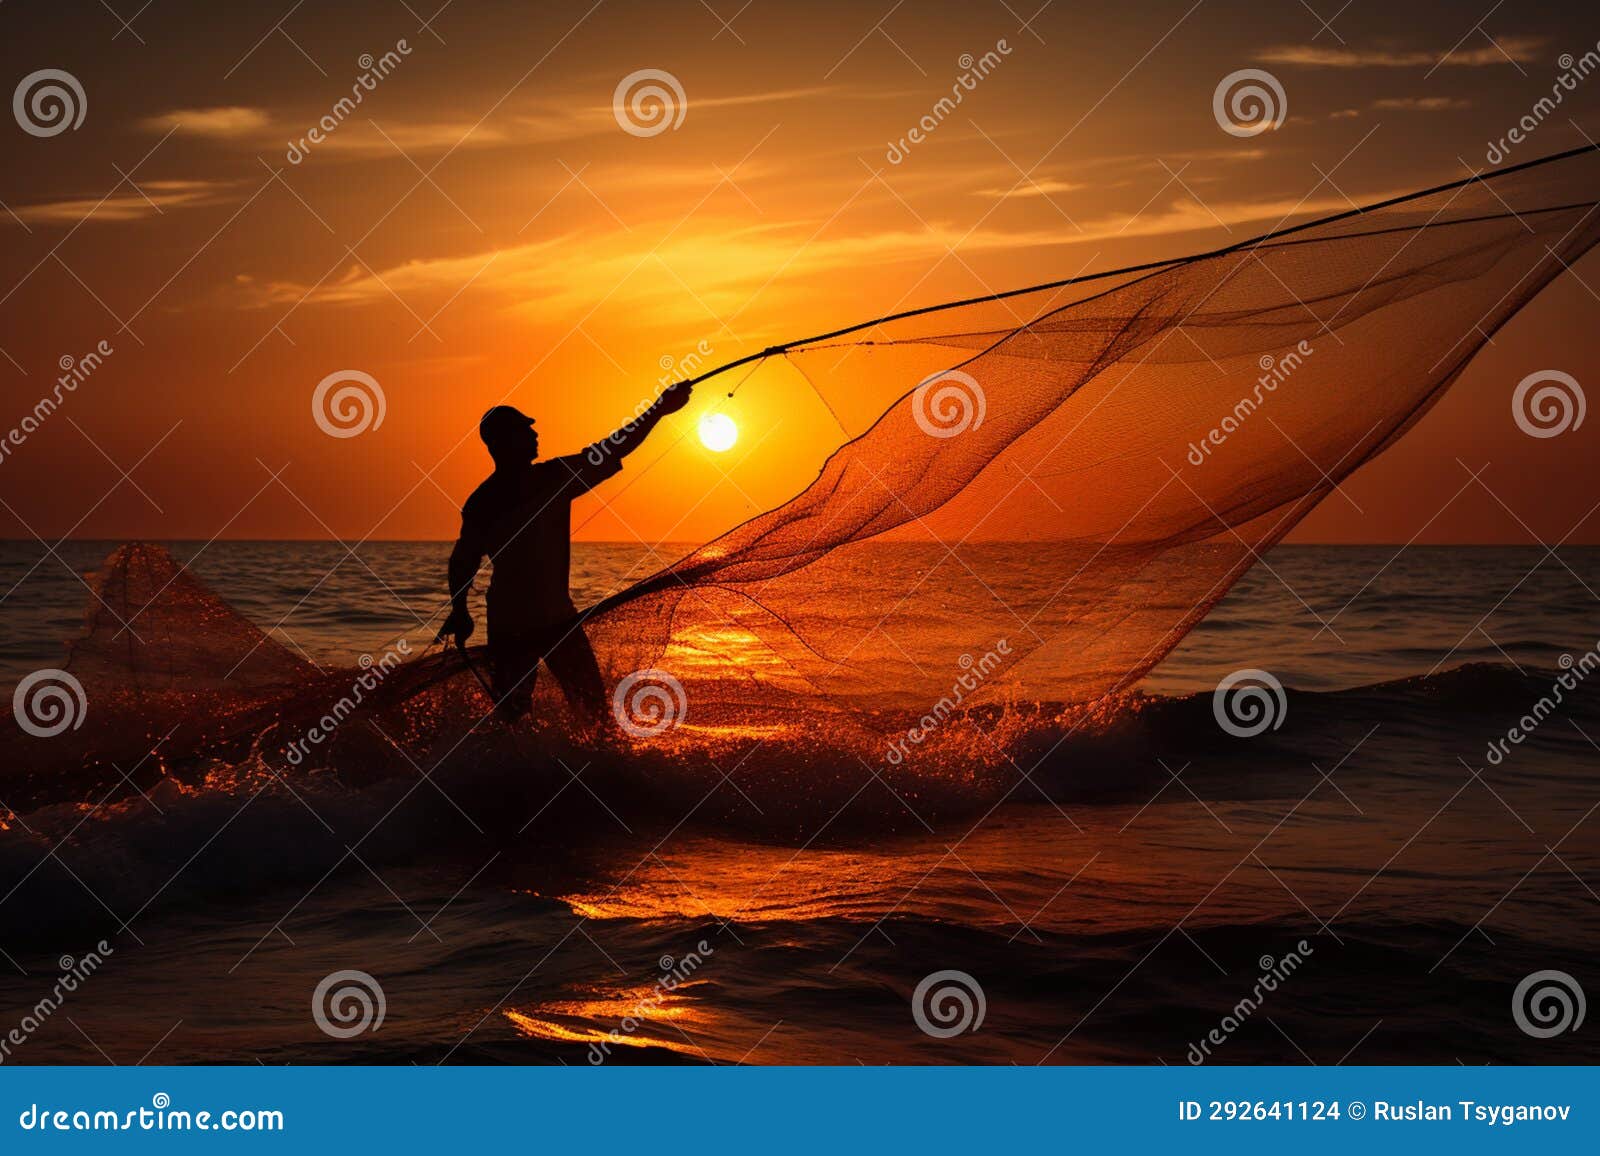 Fisherman Catches Fish with a Net before Sunrise. Fisherman